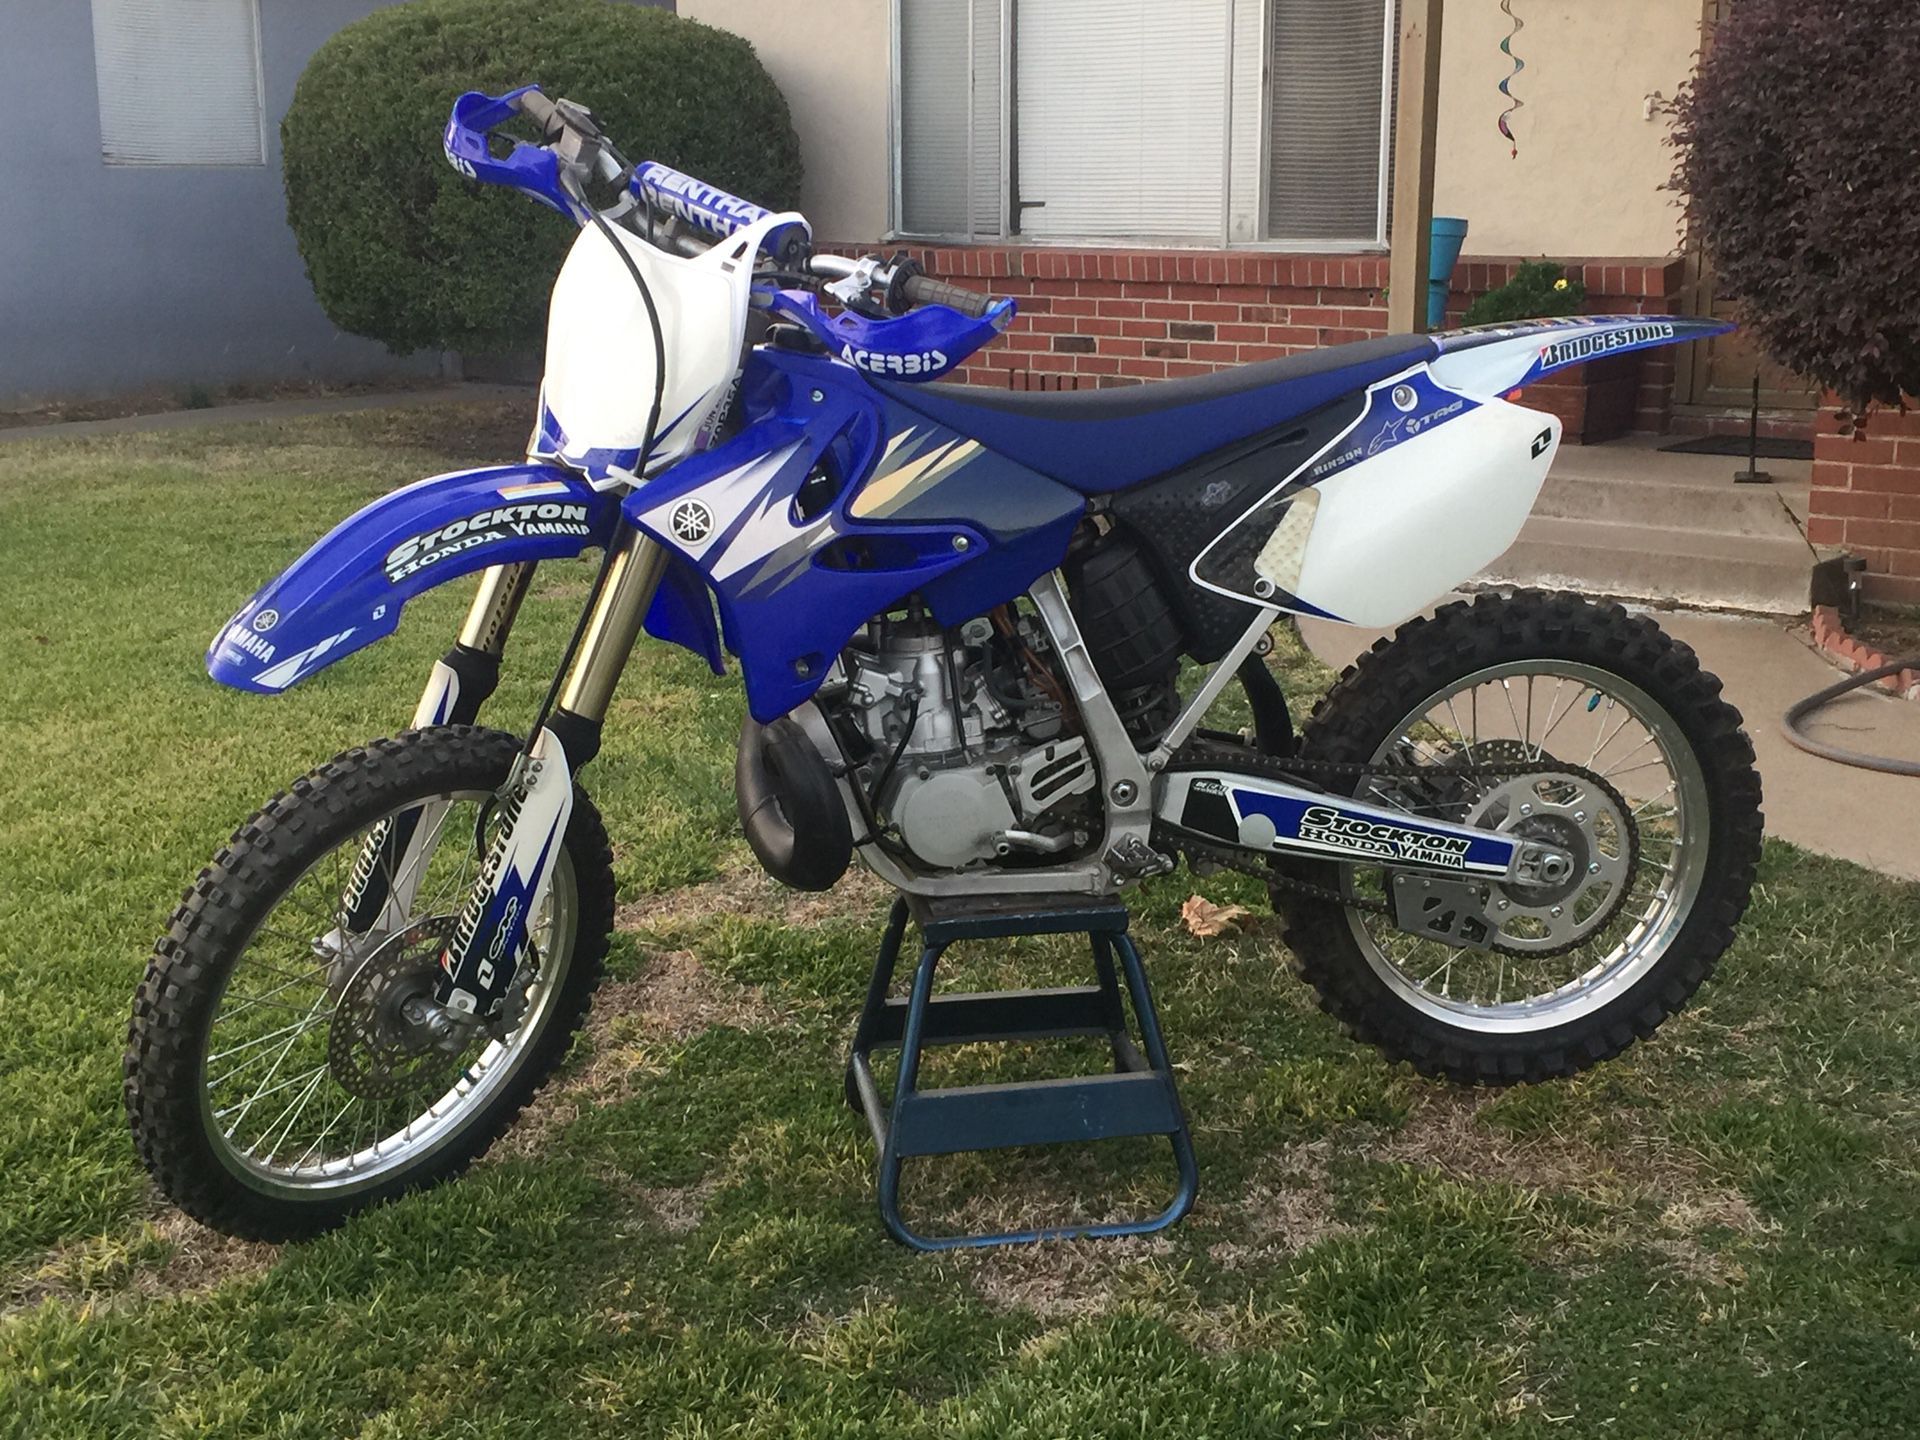 Im selling my 06 yz250 great bike never raced trail ridden alway garaged kept don’t ride it no more just need to sale